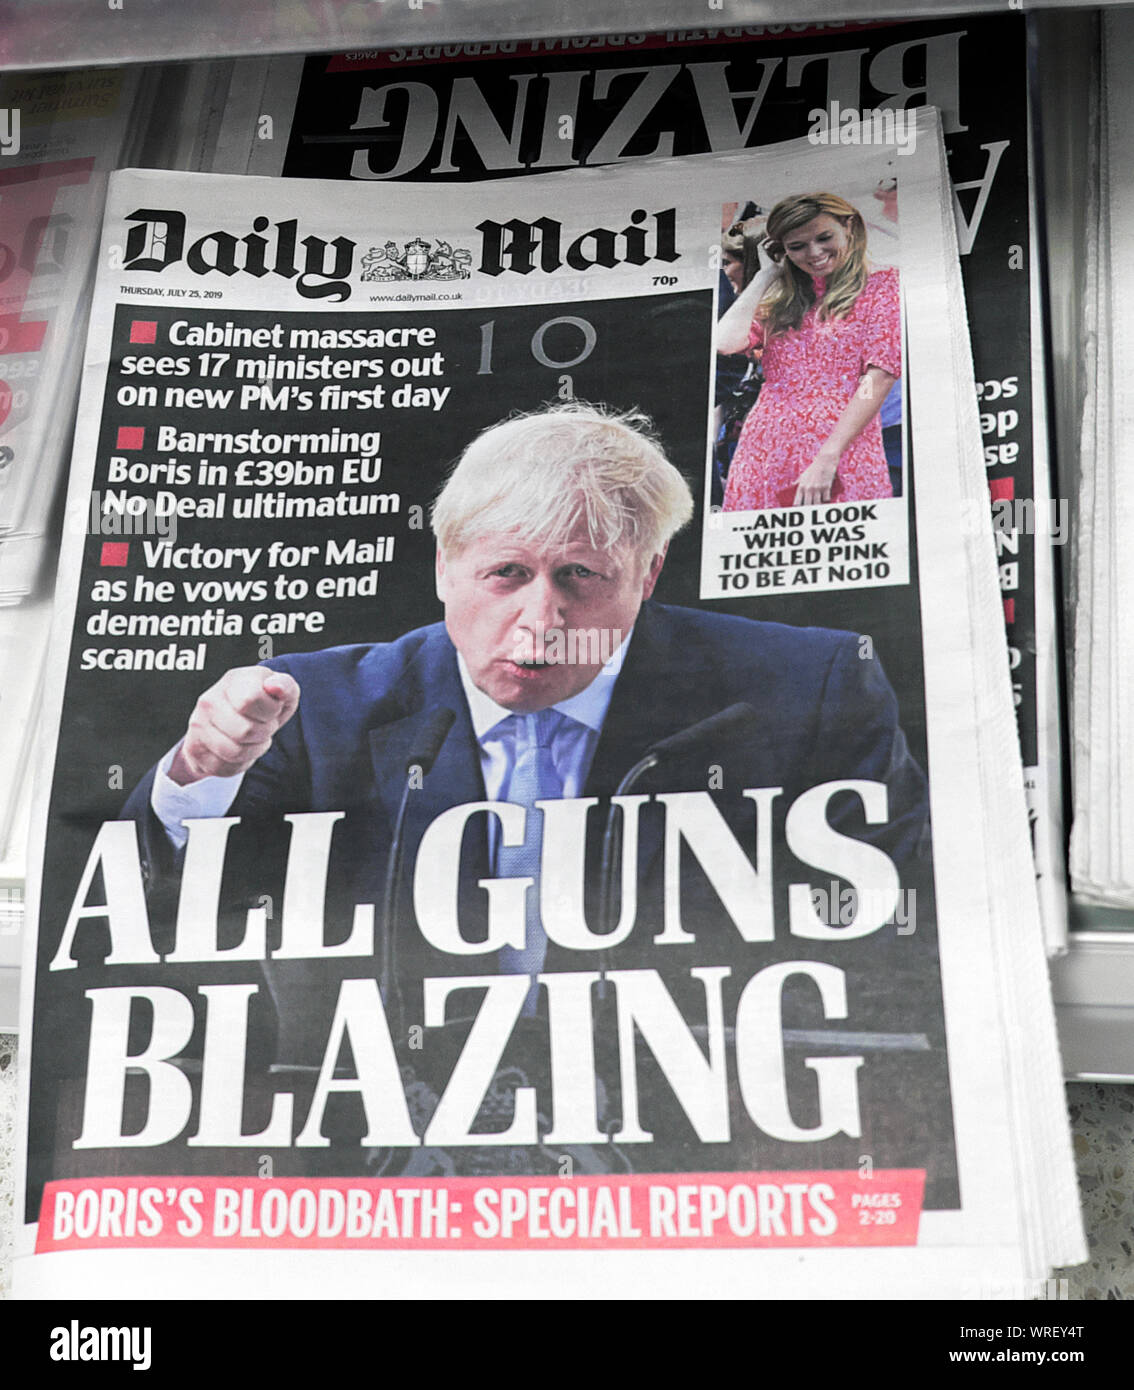 Daily Mail front page headlines 25 July 2019 Boris Johnson 'All Guns Blazing' 17 Cabinet Ministers out on PM's 1st day London England UK Stock Photo